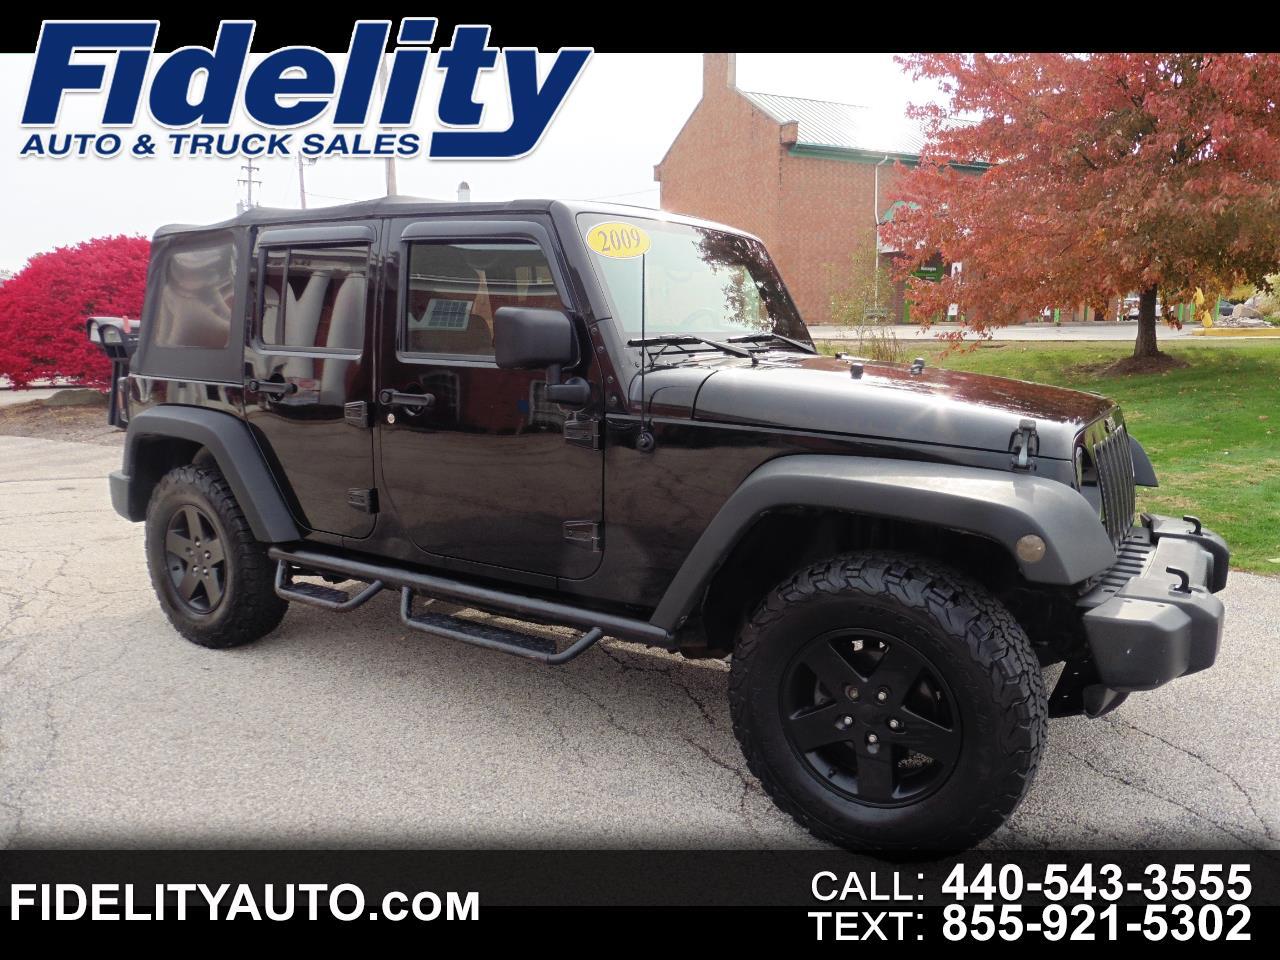 2009 Jeep Wrangler Unlimited 4WD 4dr Rubicon